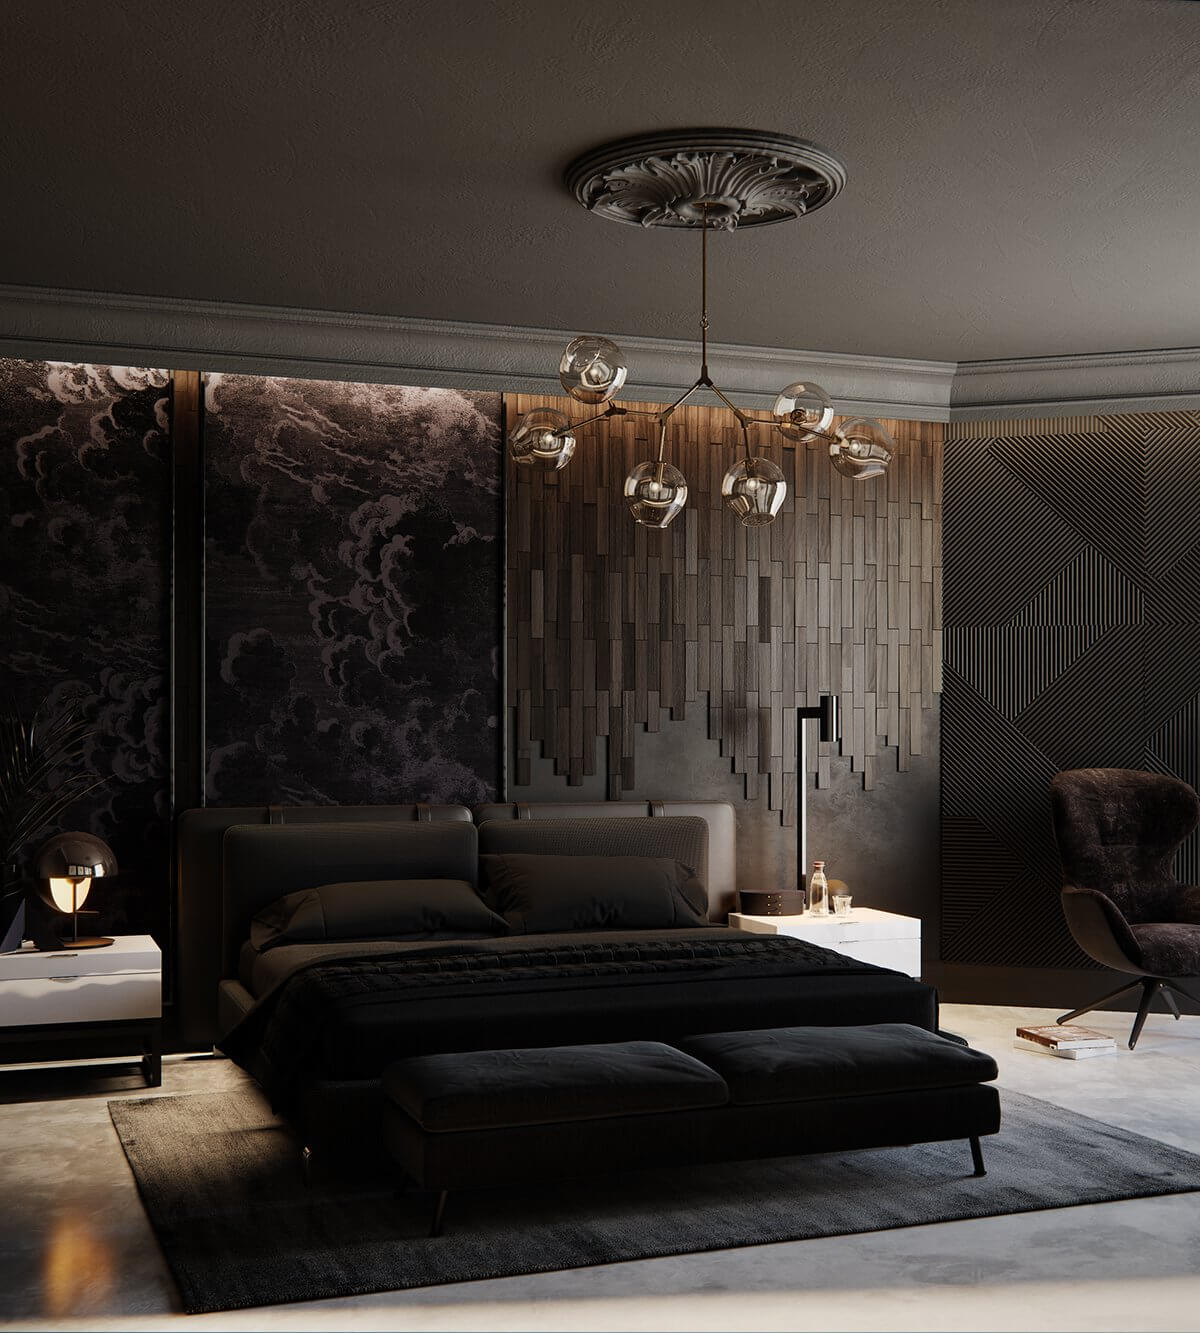 Moscow apartment bedroom black bed - cgi visualization